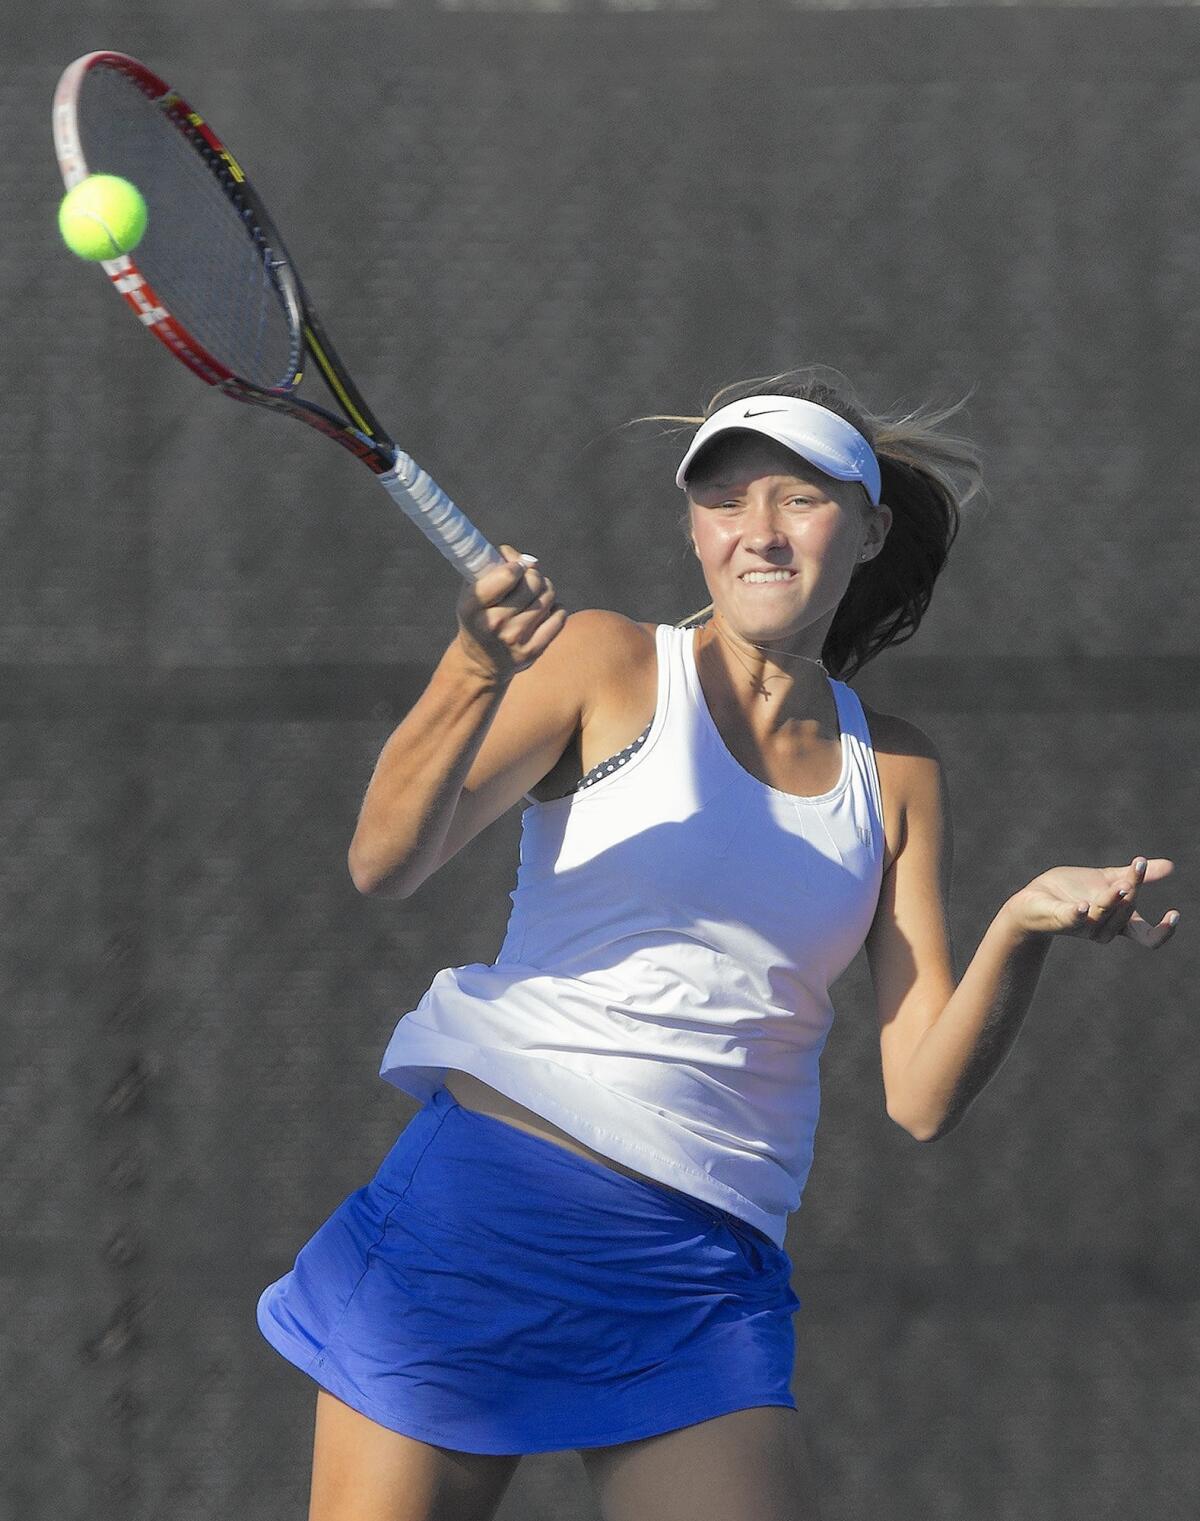 Corona del Mar High's Danielle Willson competes during a singles set against Dana Hills in a nonleague girls' tennis match on Wednesday.